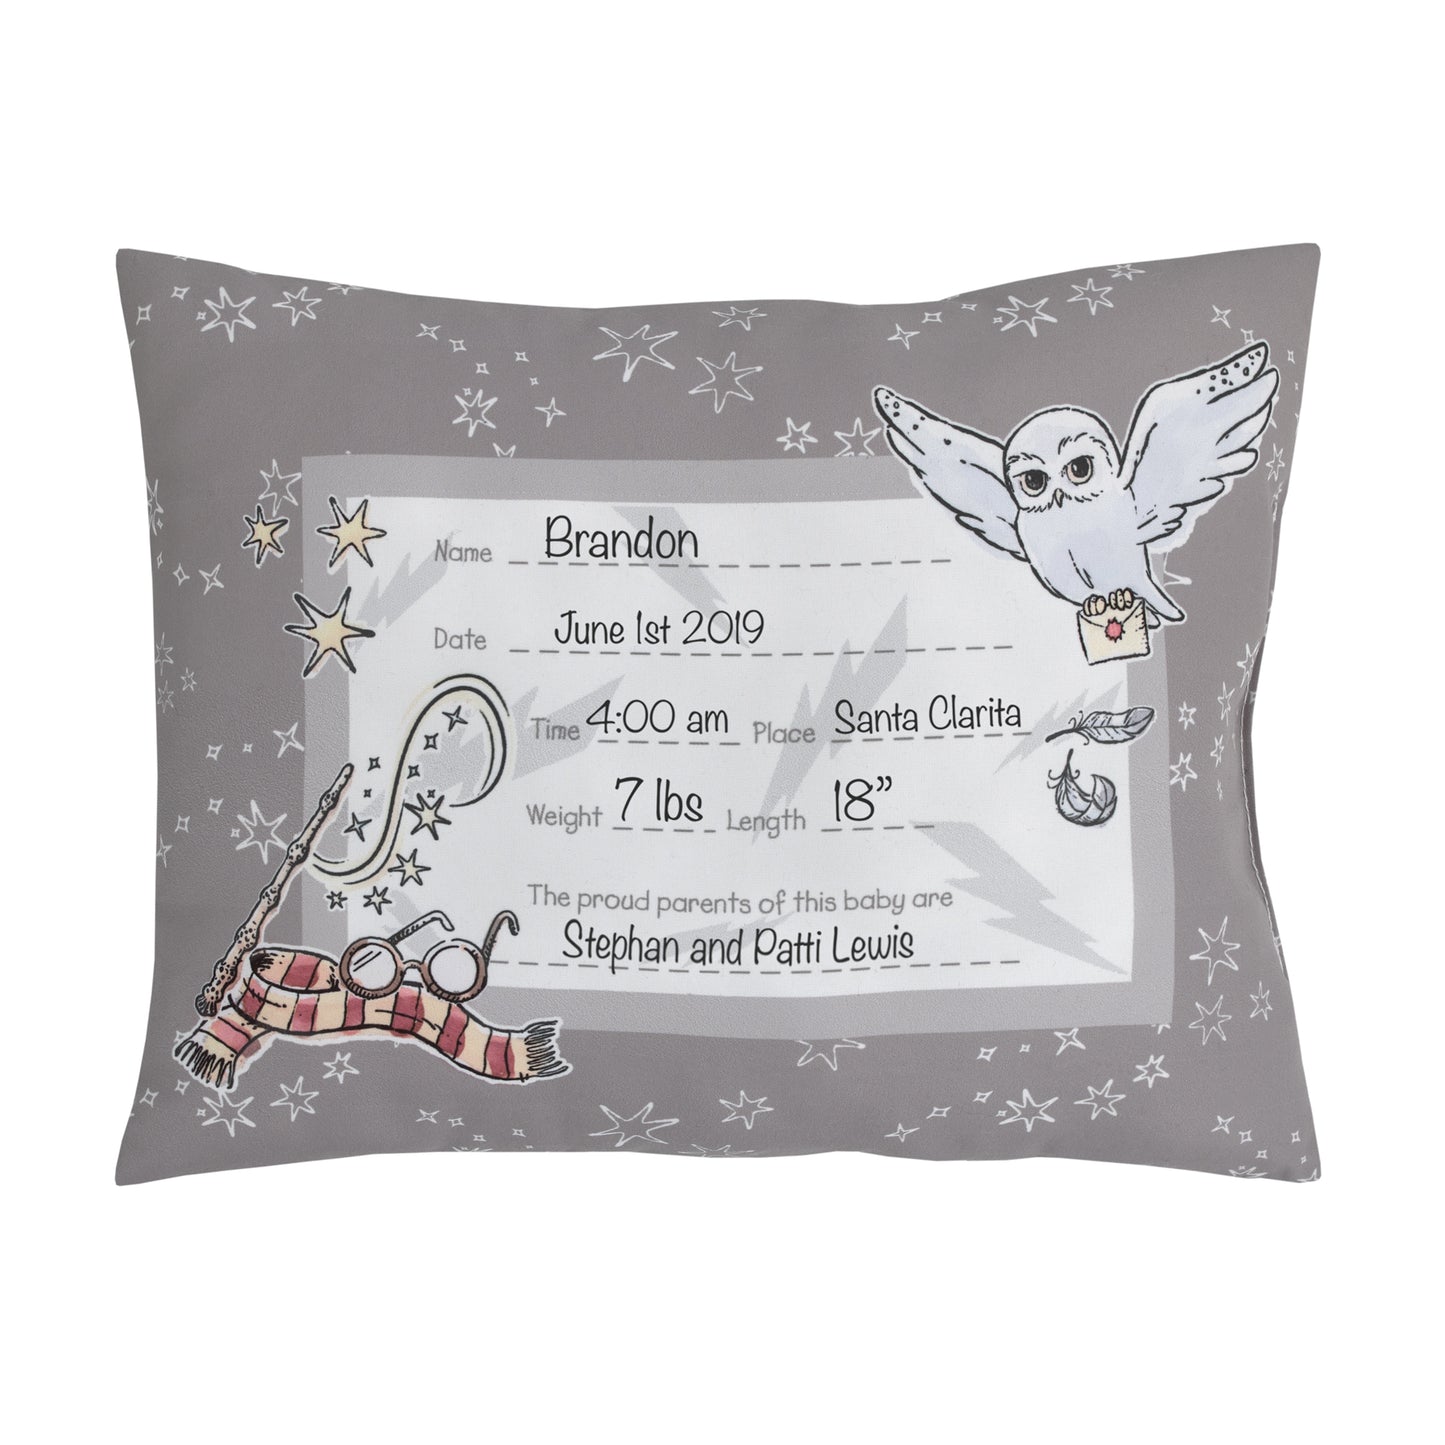 Warner Brothers Harry Potter Magical Moments Grey and White Keepsake Pillow